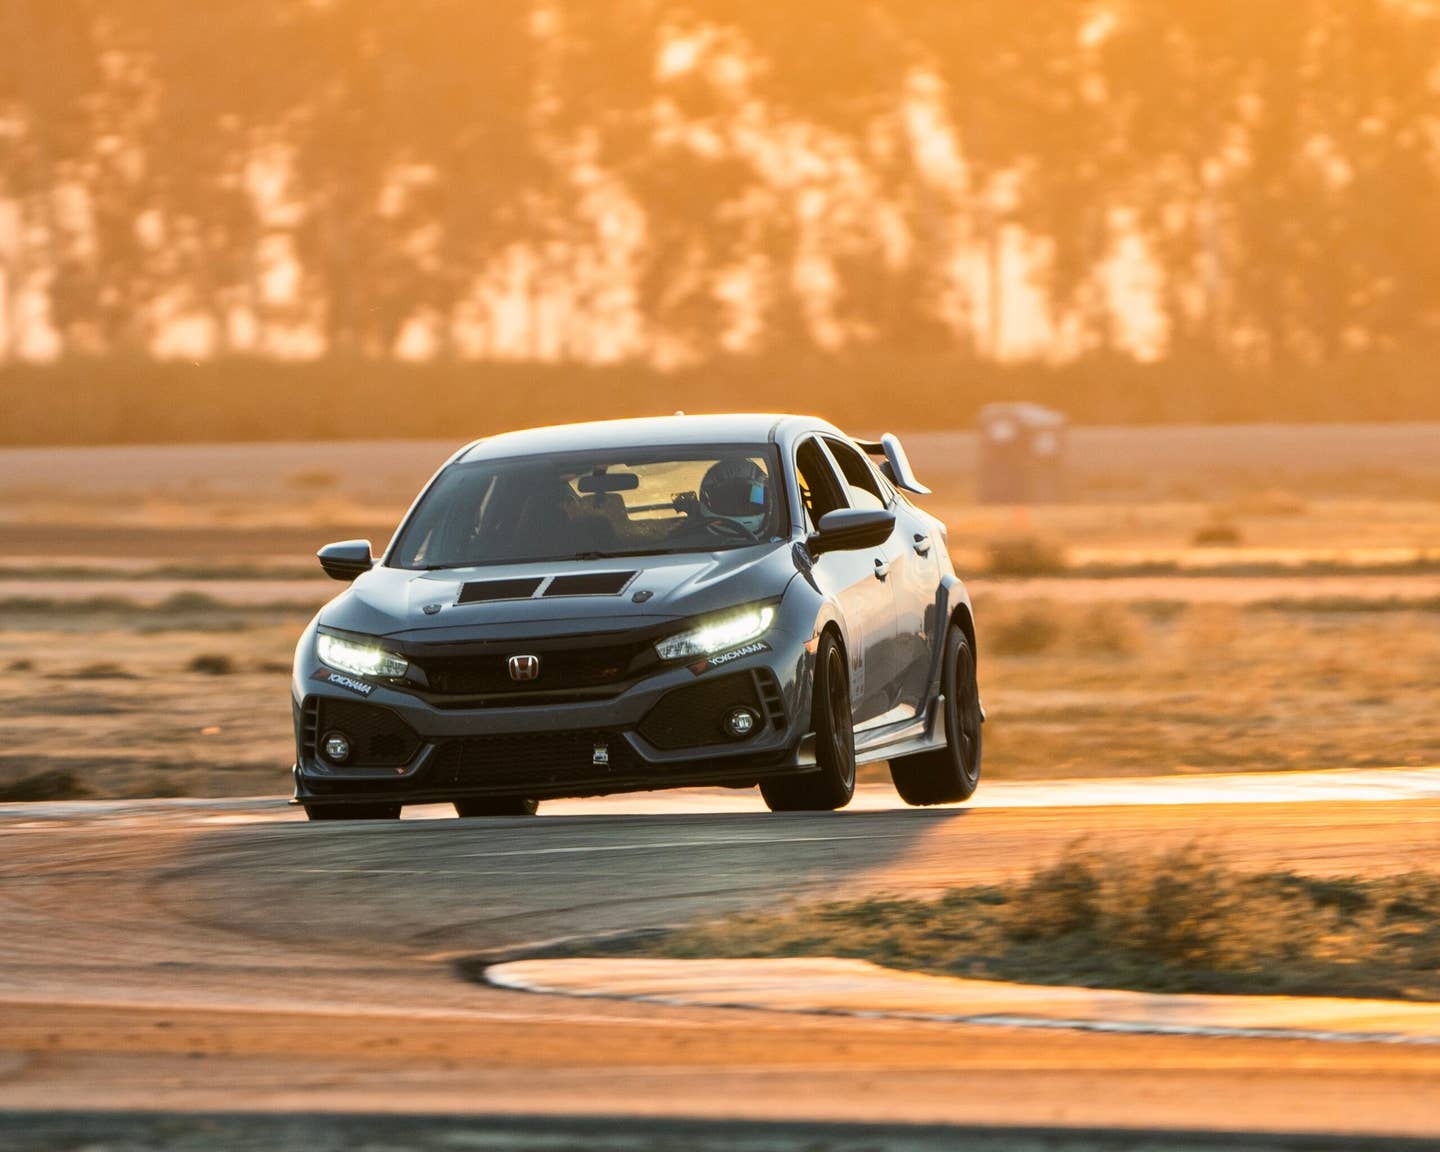 Chris Rosales doing what he does best (on three wheels) in his Civic Type R.